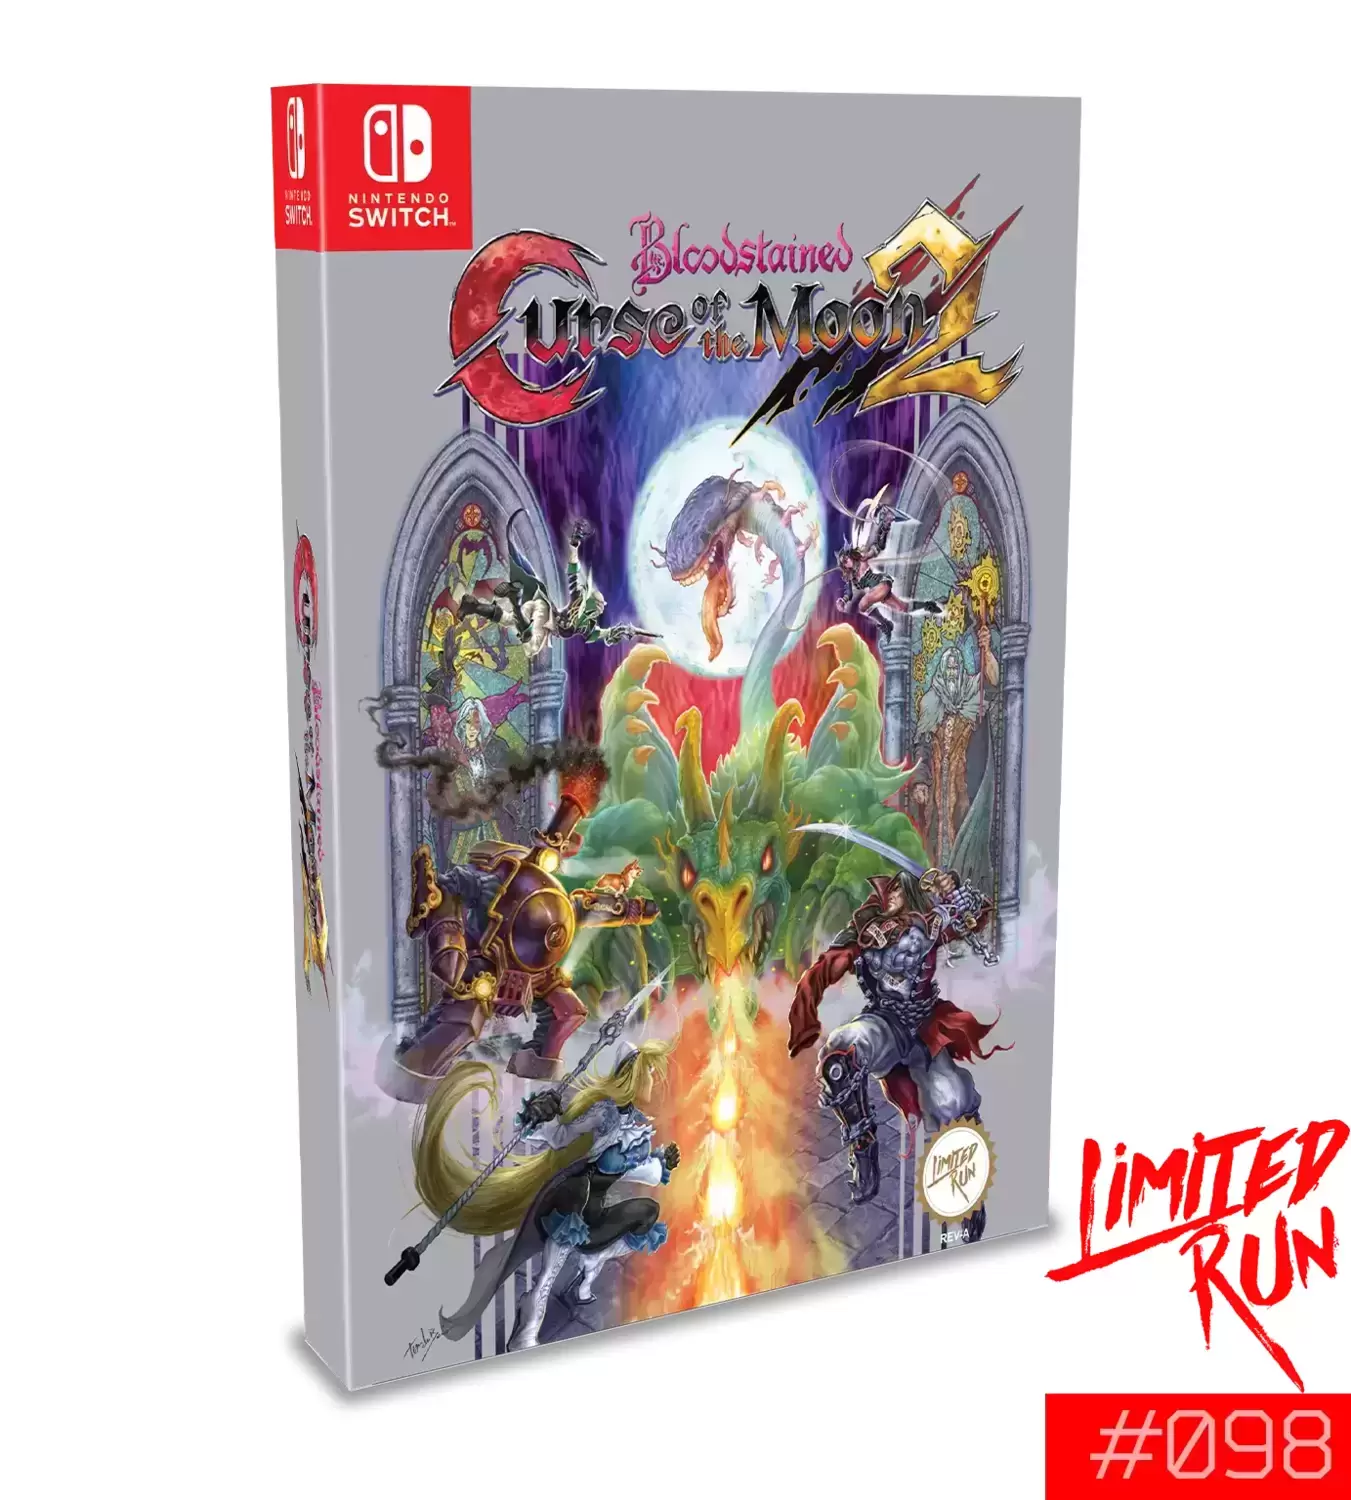 Nintendo Switch Games - Bloodstained: Curse of the Moon 2 Classic Edition - Limited Run Games